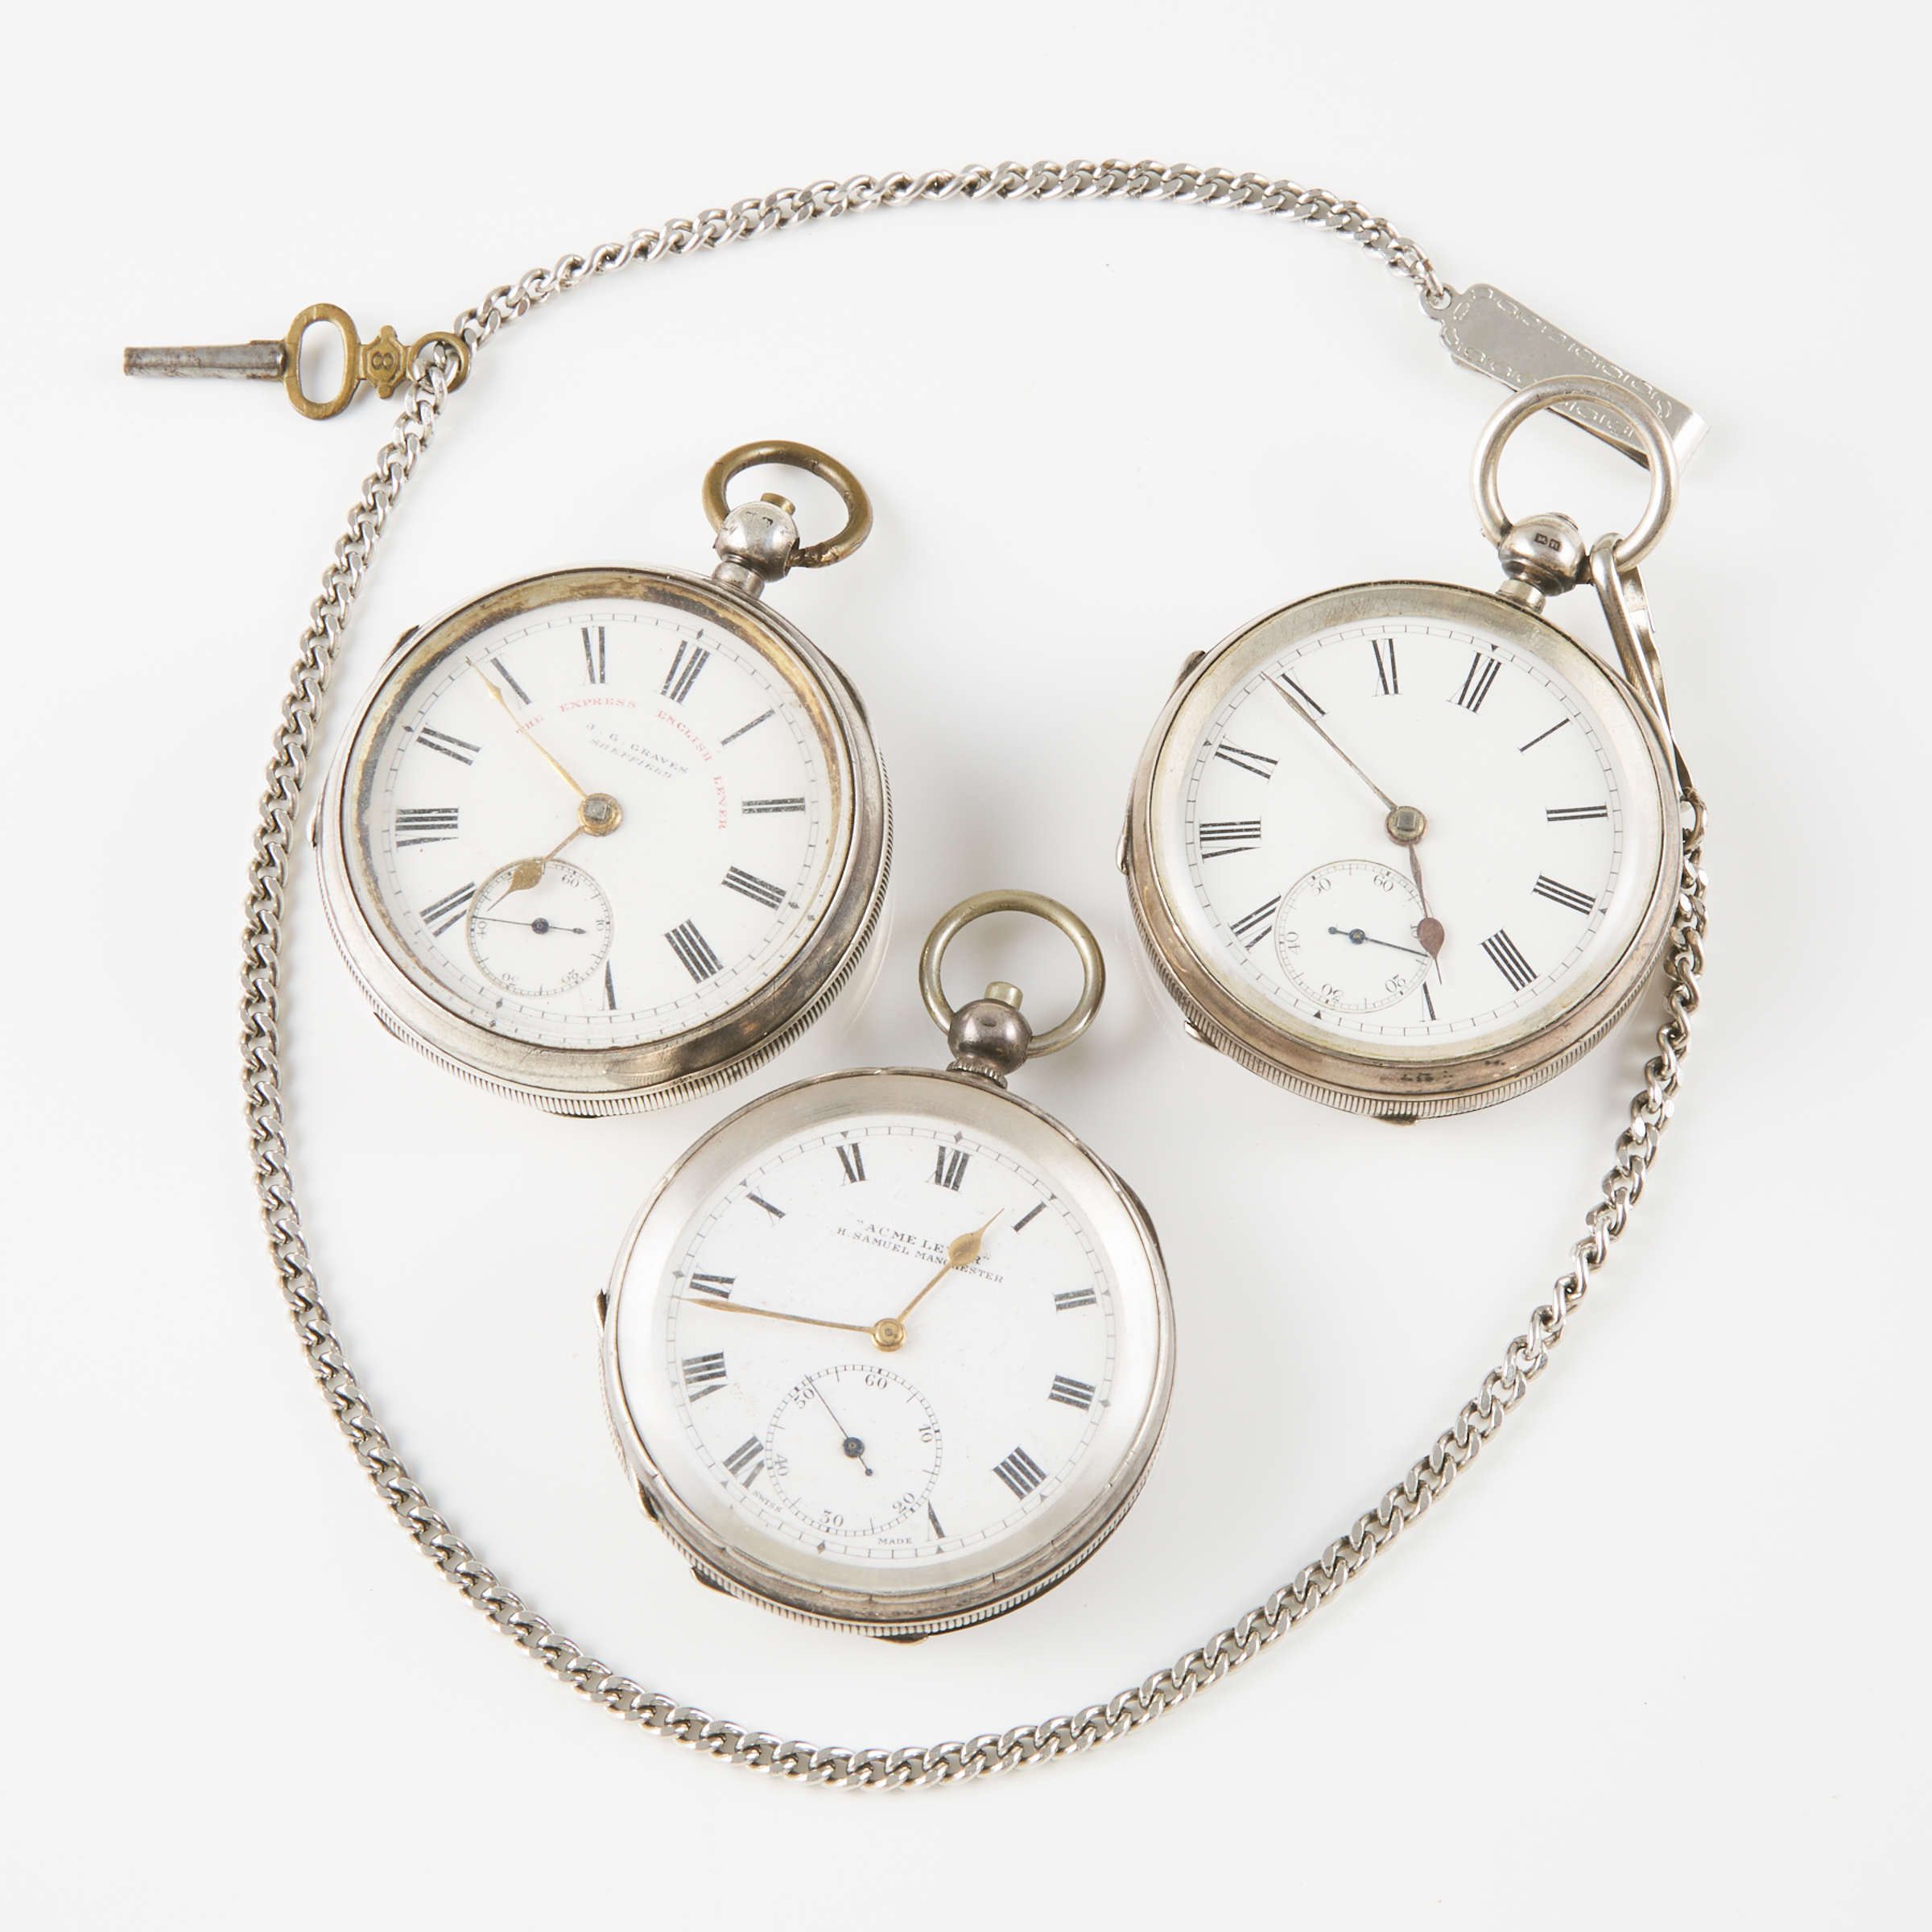 3 Various Openface Key Wind Pocket Watches